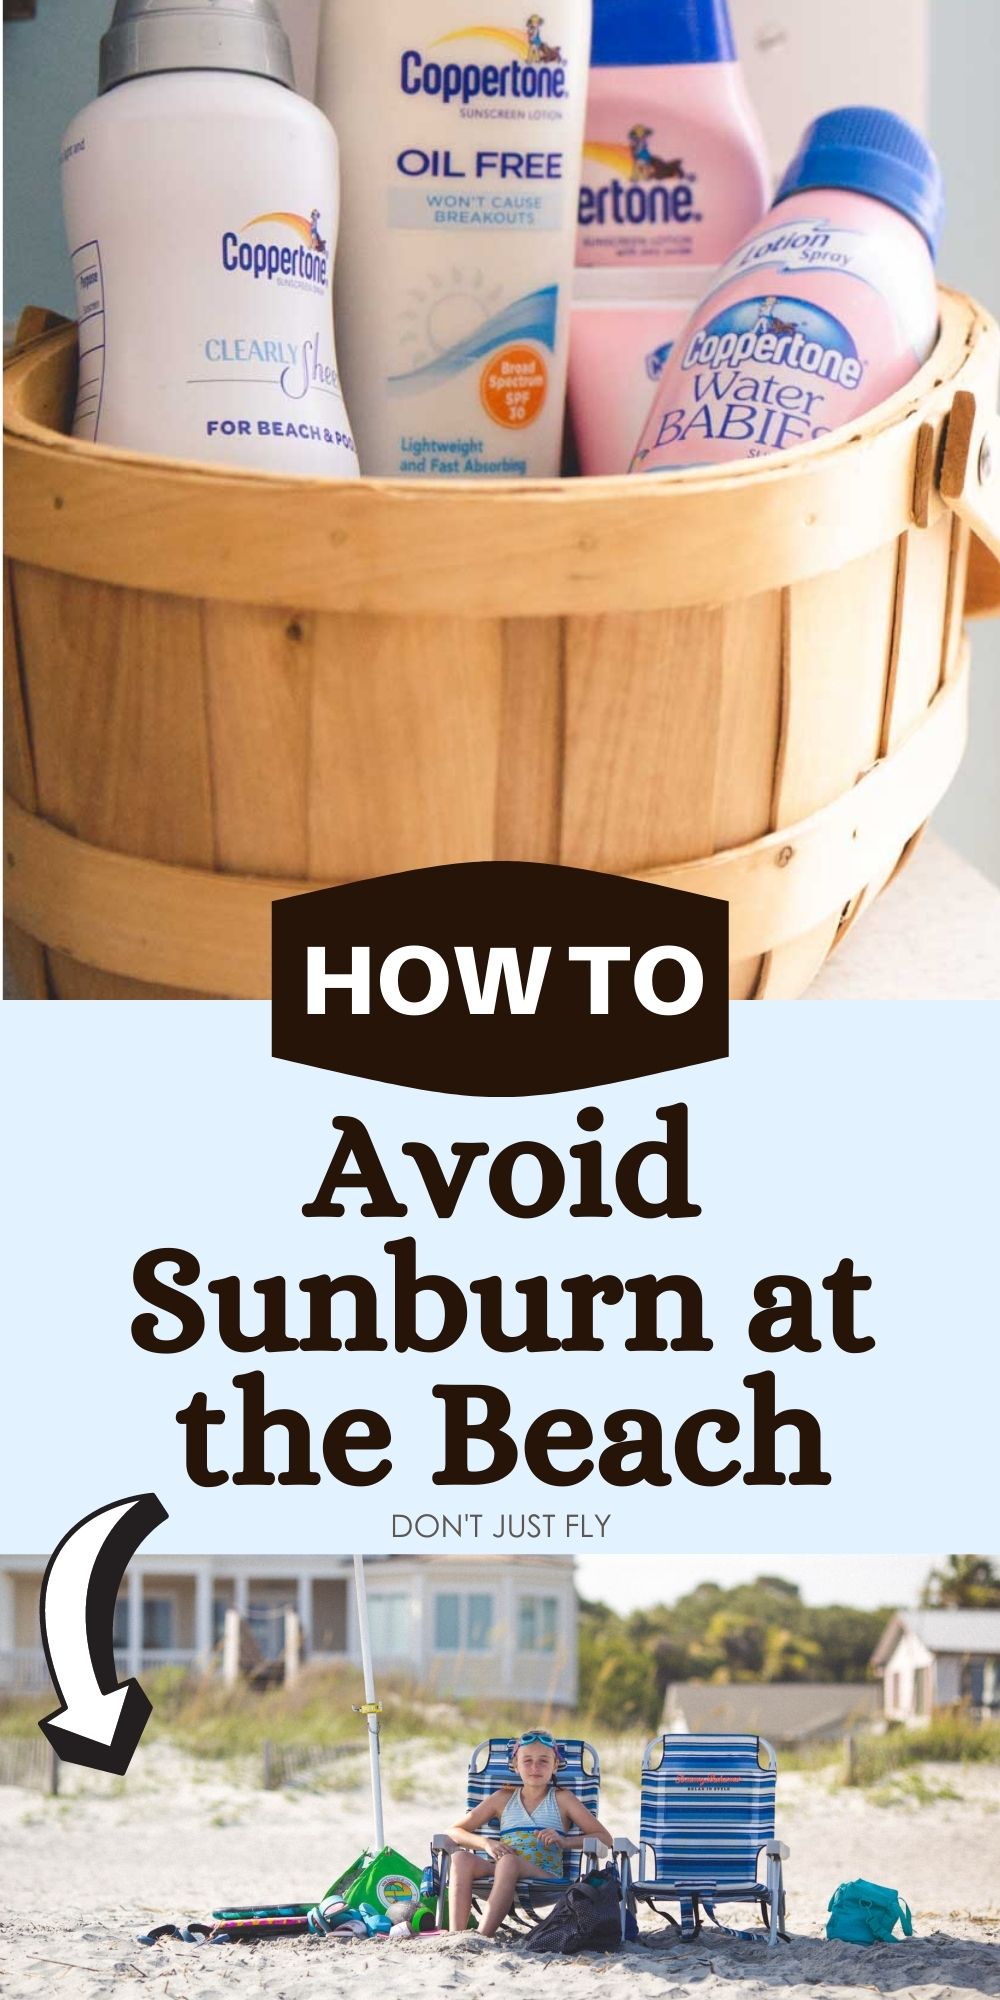 A photo collage shows several ways to avoid sunburn.